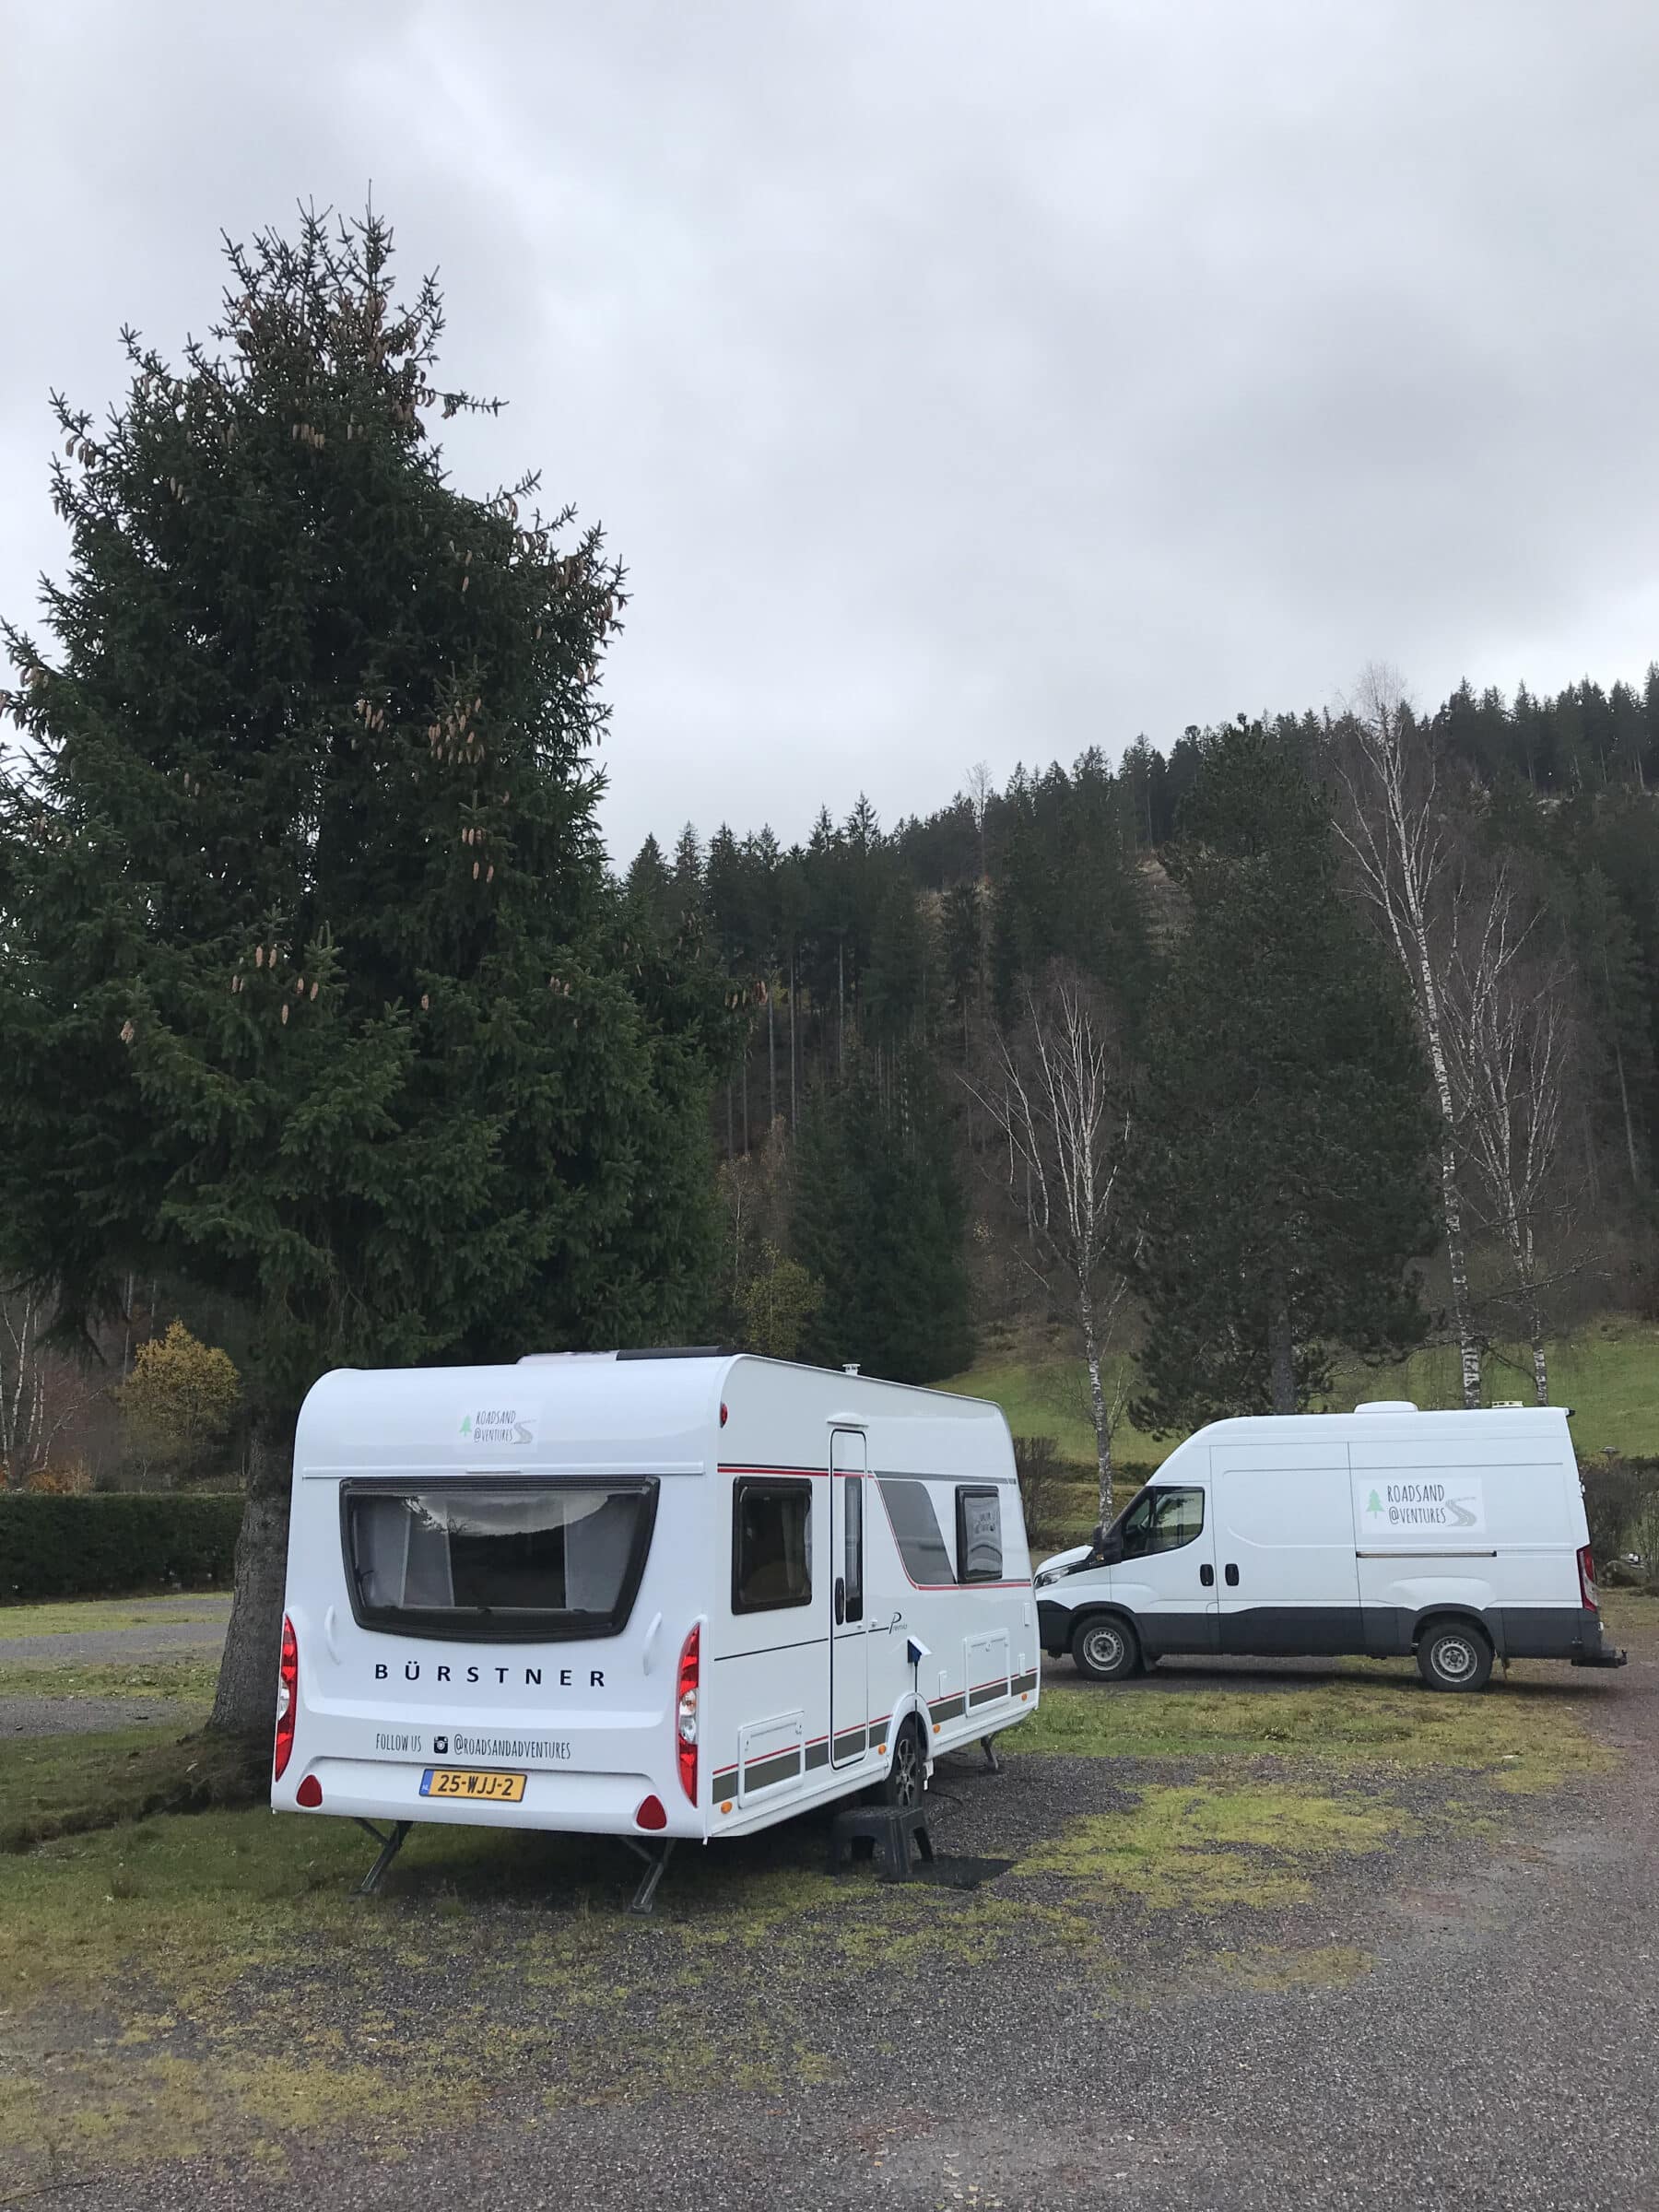 Pitch at 'Camping Bankenhof' surrounded by the Black Forest